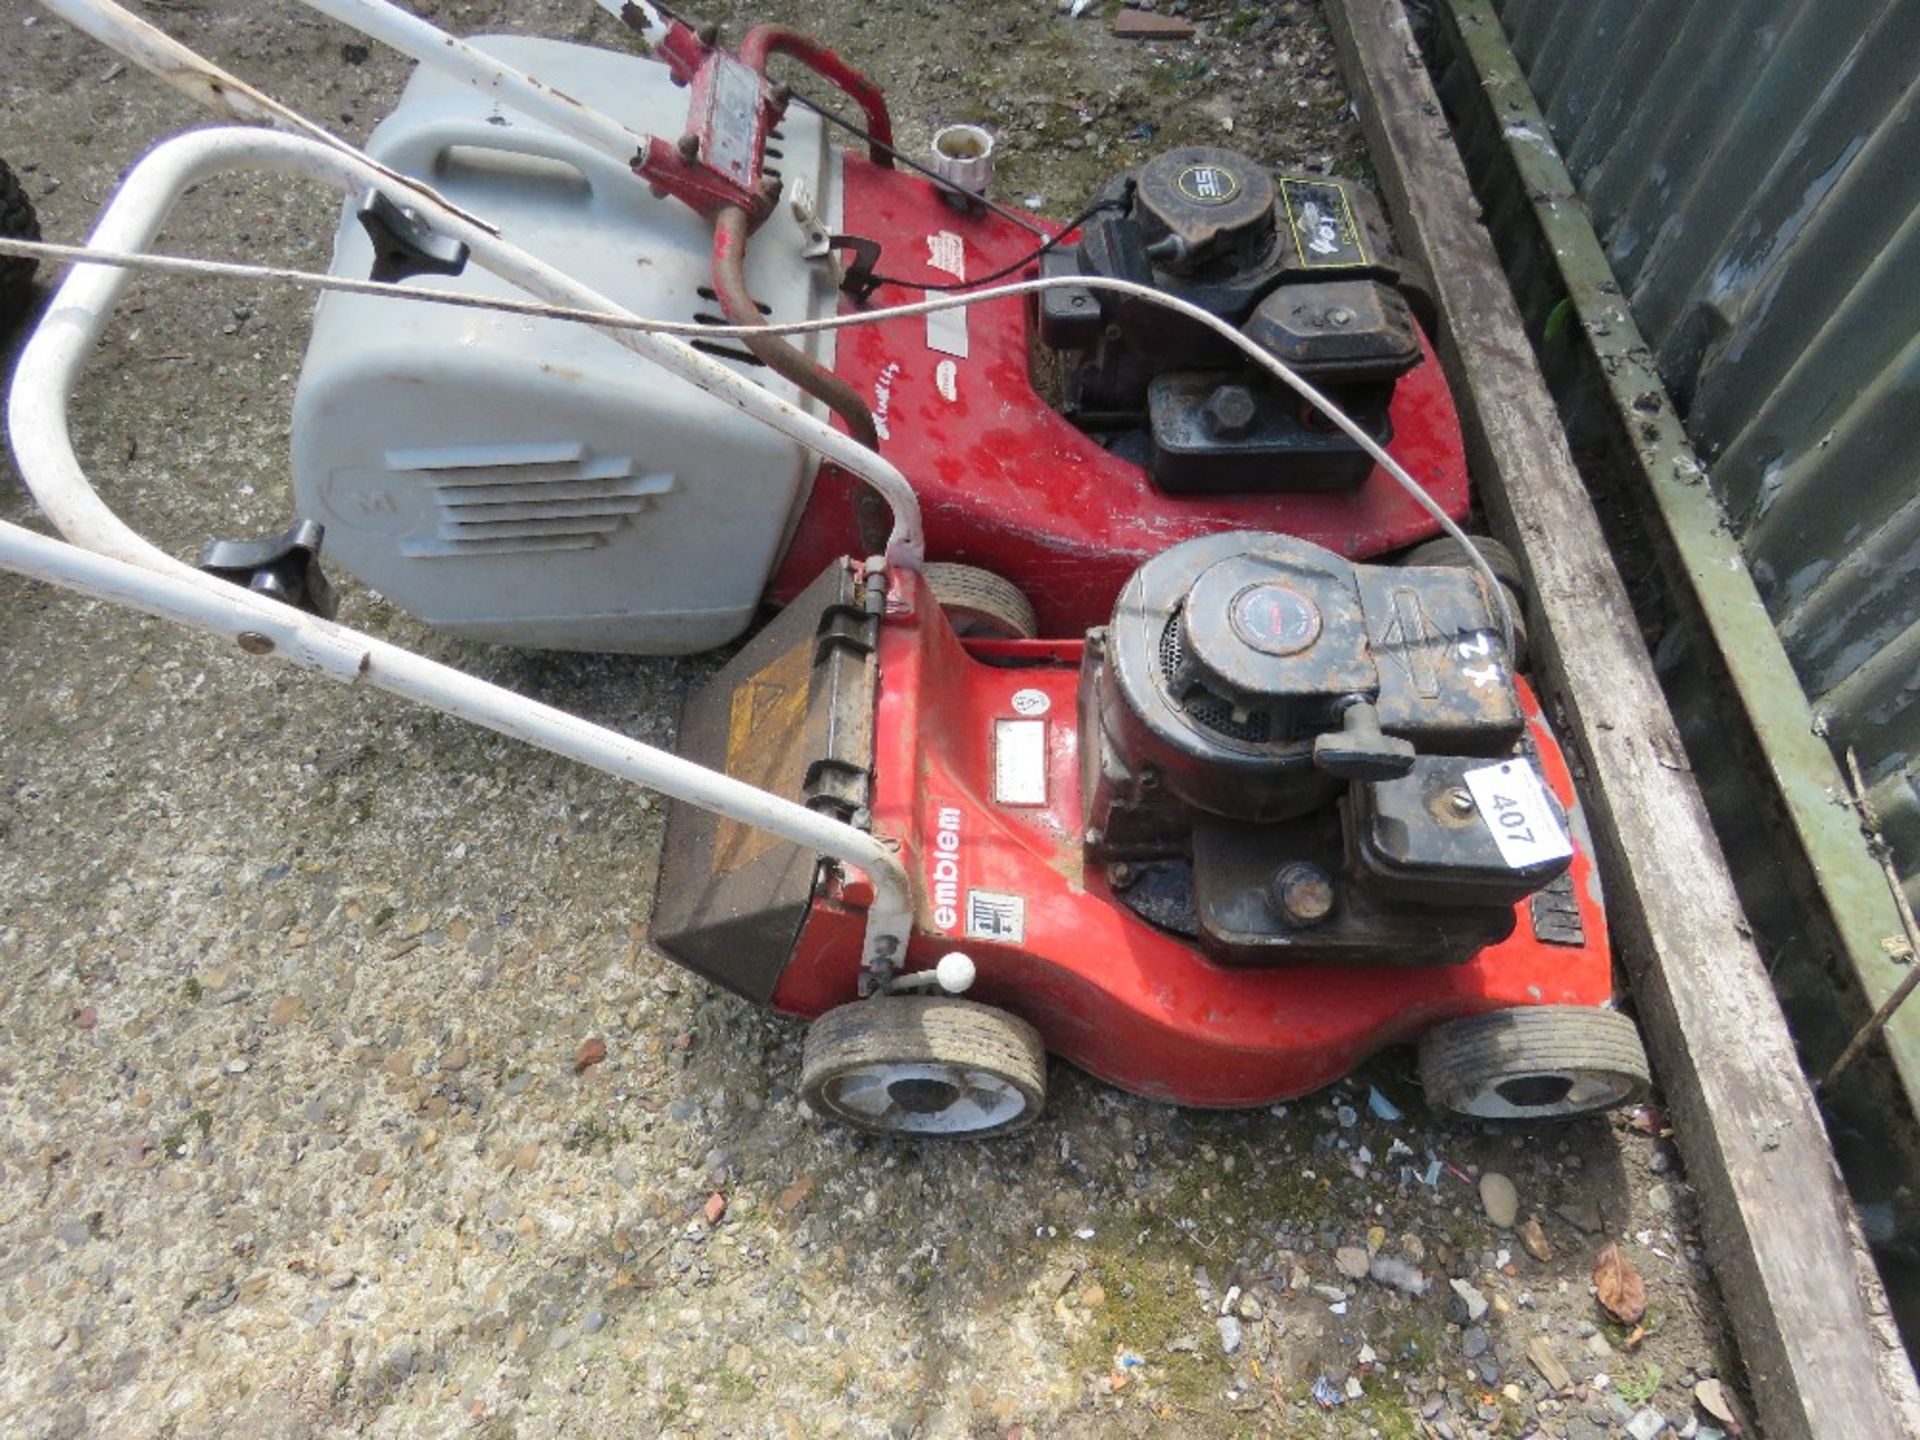 2 X PETROL ENGINED LAWN MOWERS. - Image 2 of 6